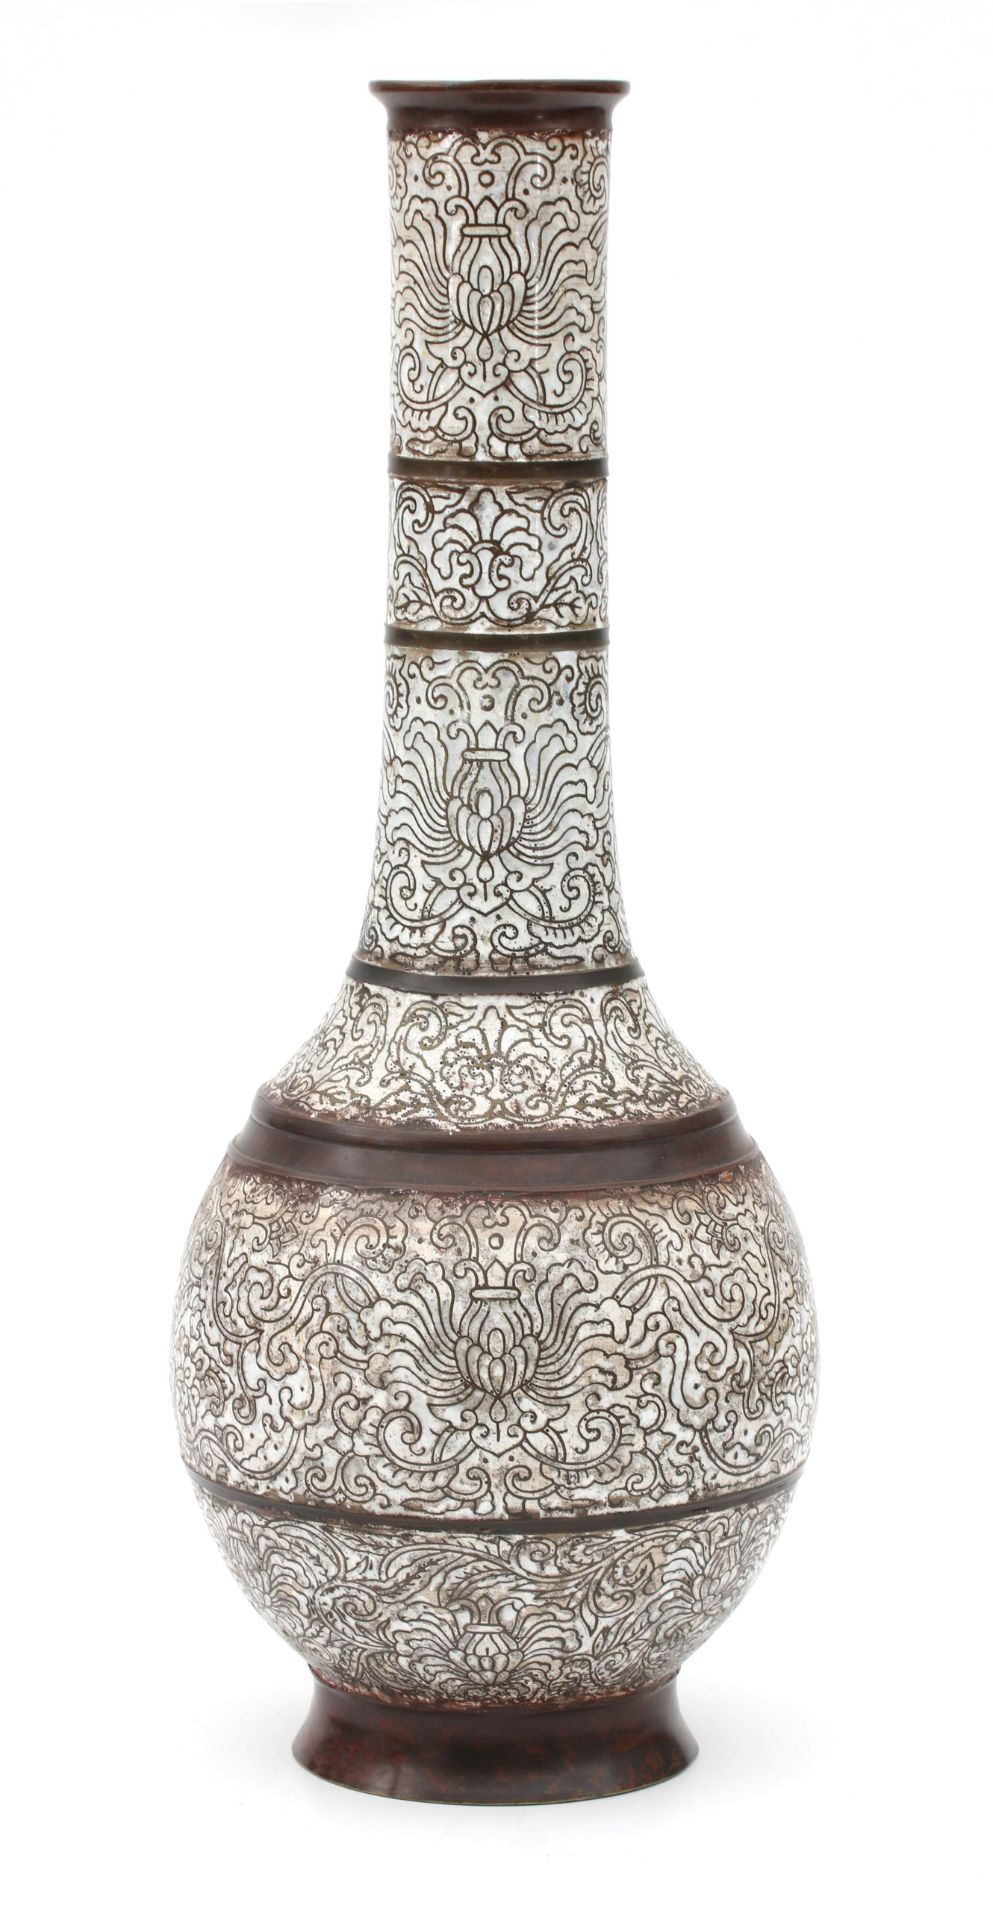 An Eastern white cloisonné vase with floral decoration, 19th century.